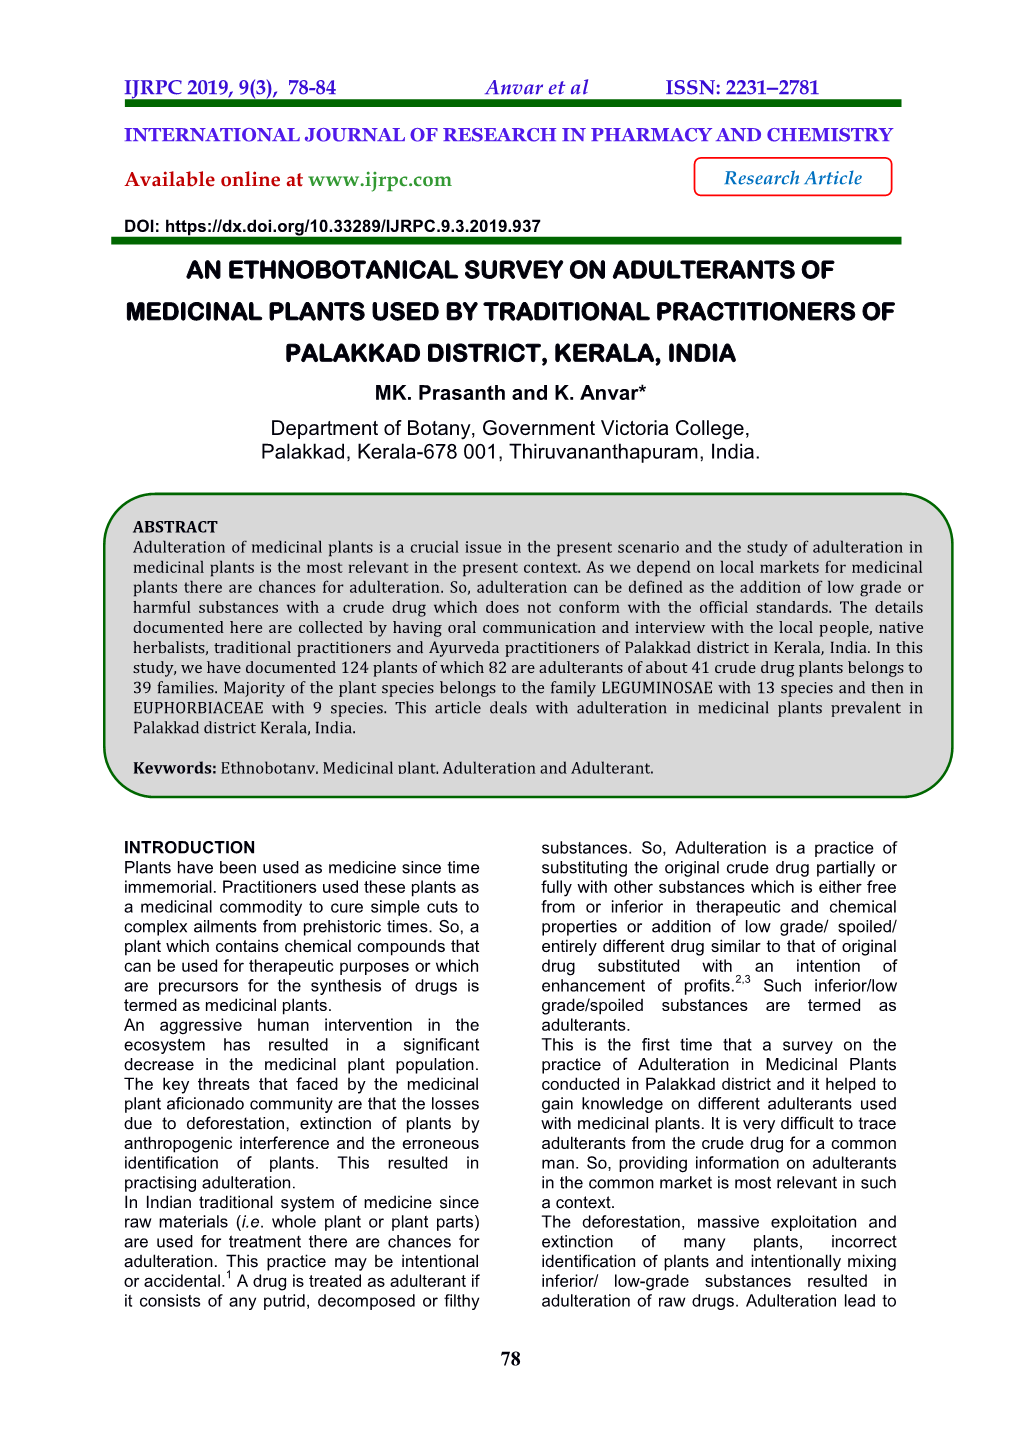 An Ethnobotanical Survey on Adulterants of Medicinal Plants Used by Traditional Practitioners of Palakkad District, Kerala, India Mk